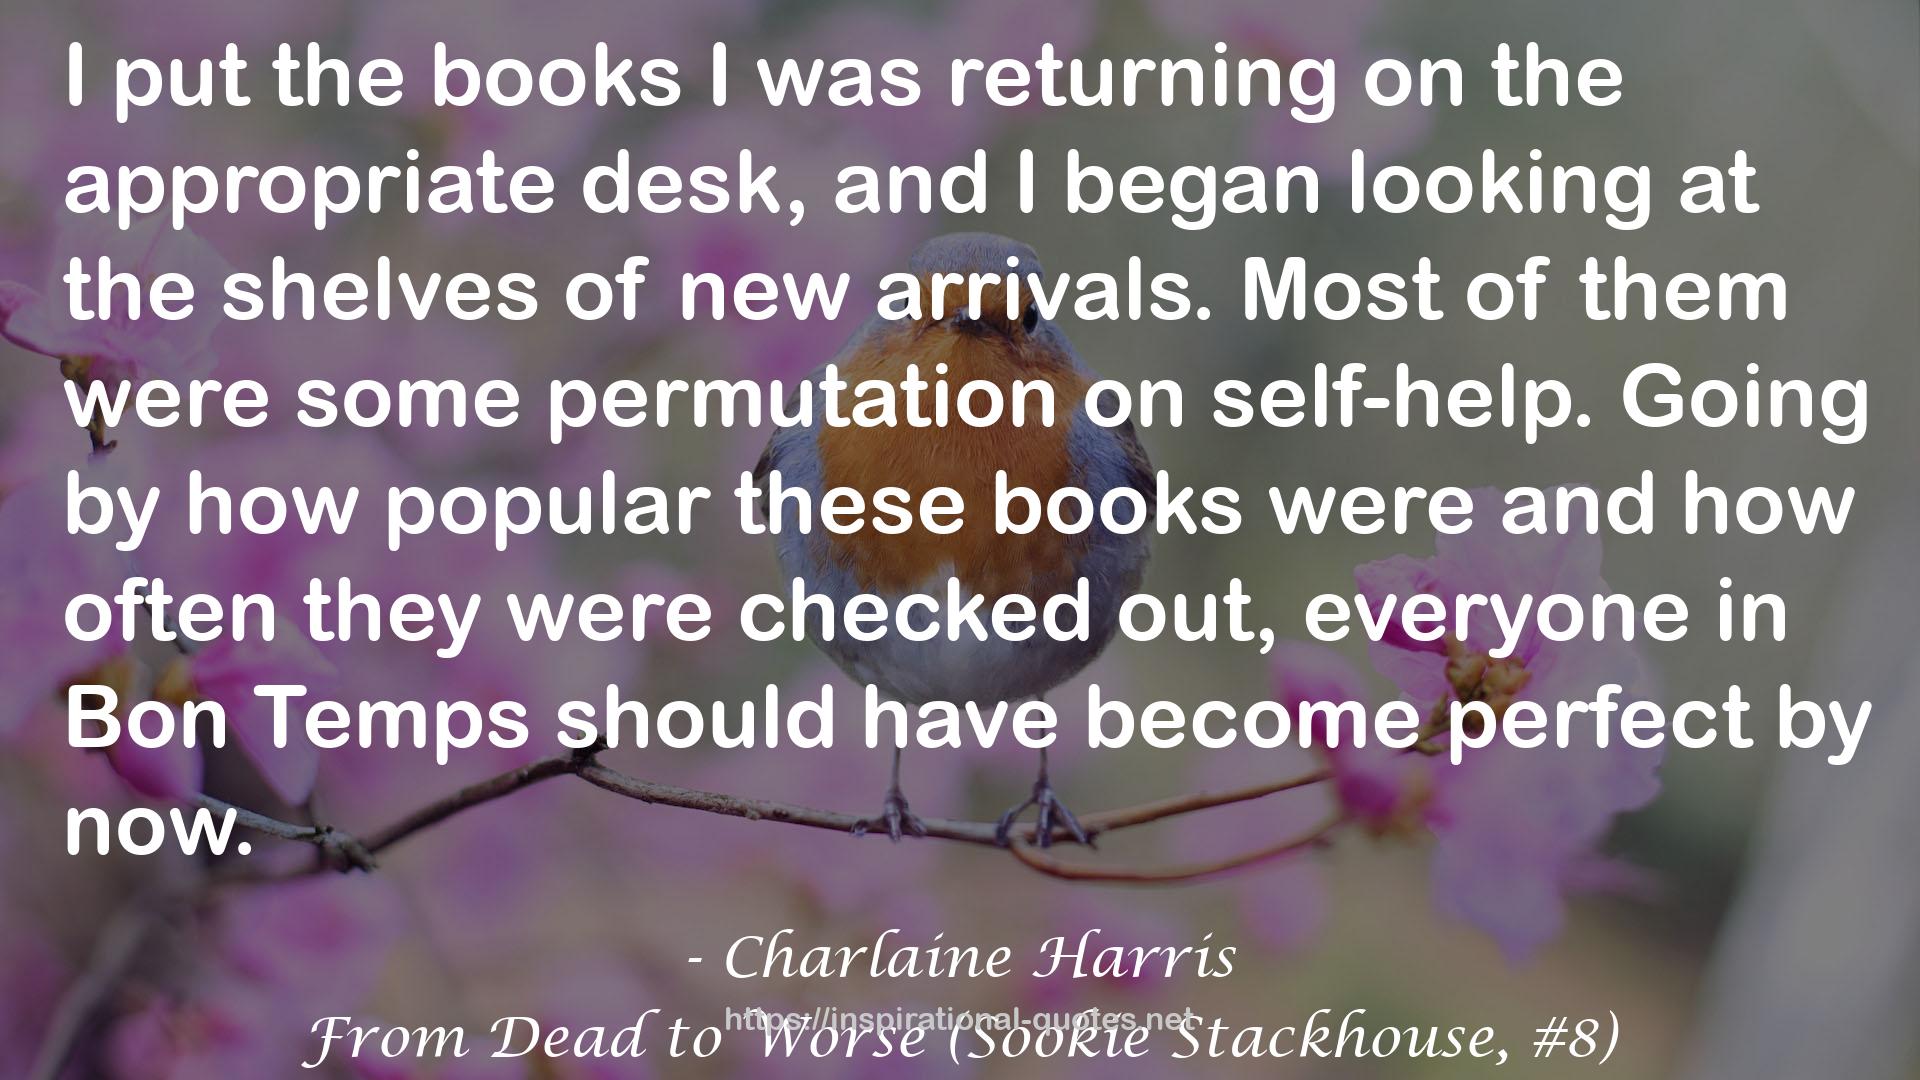 From Dead to Worse (Sookie Stackhouse, #8) QUOTES